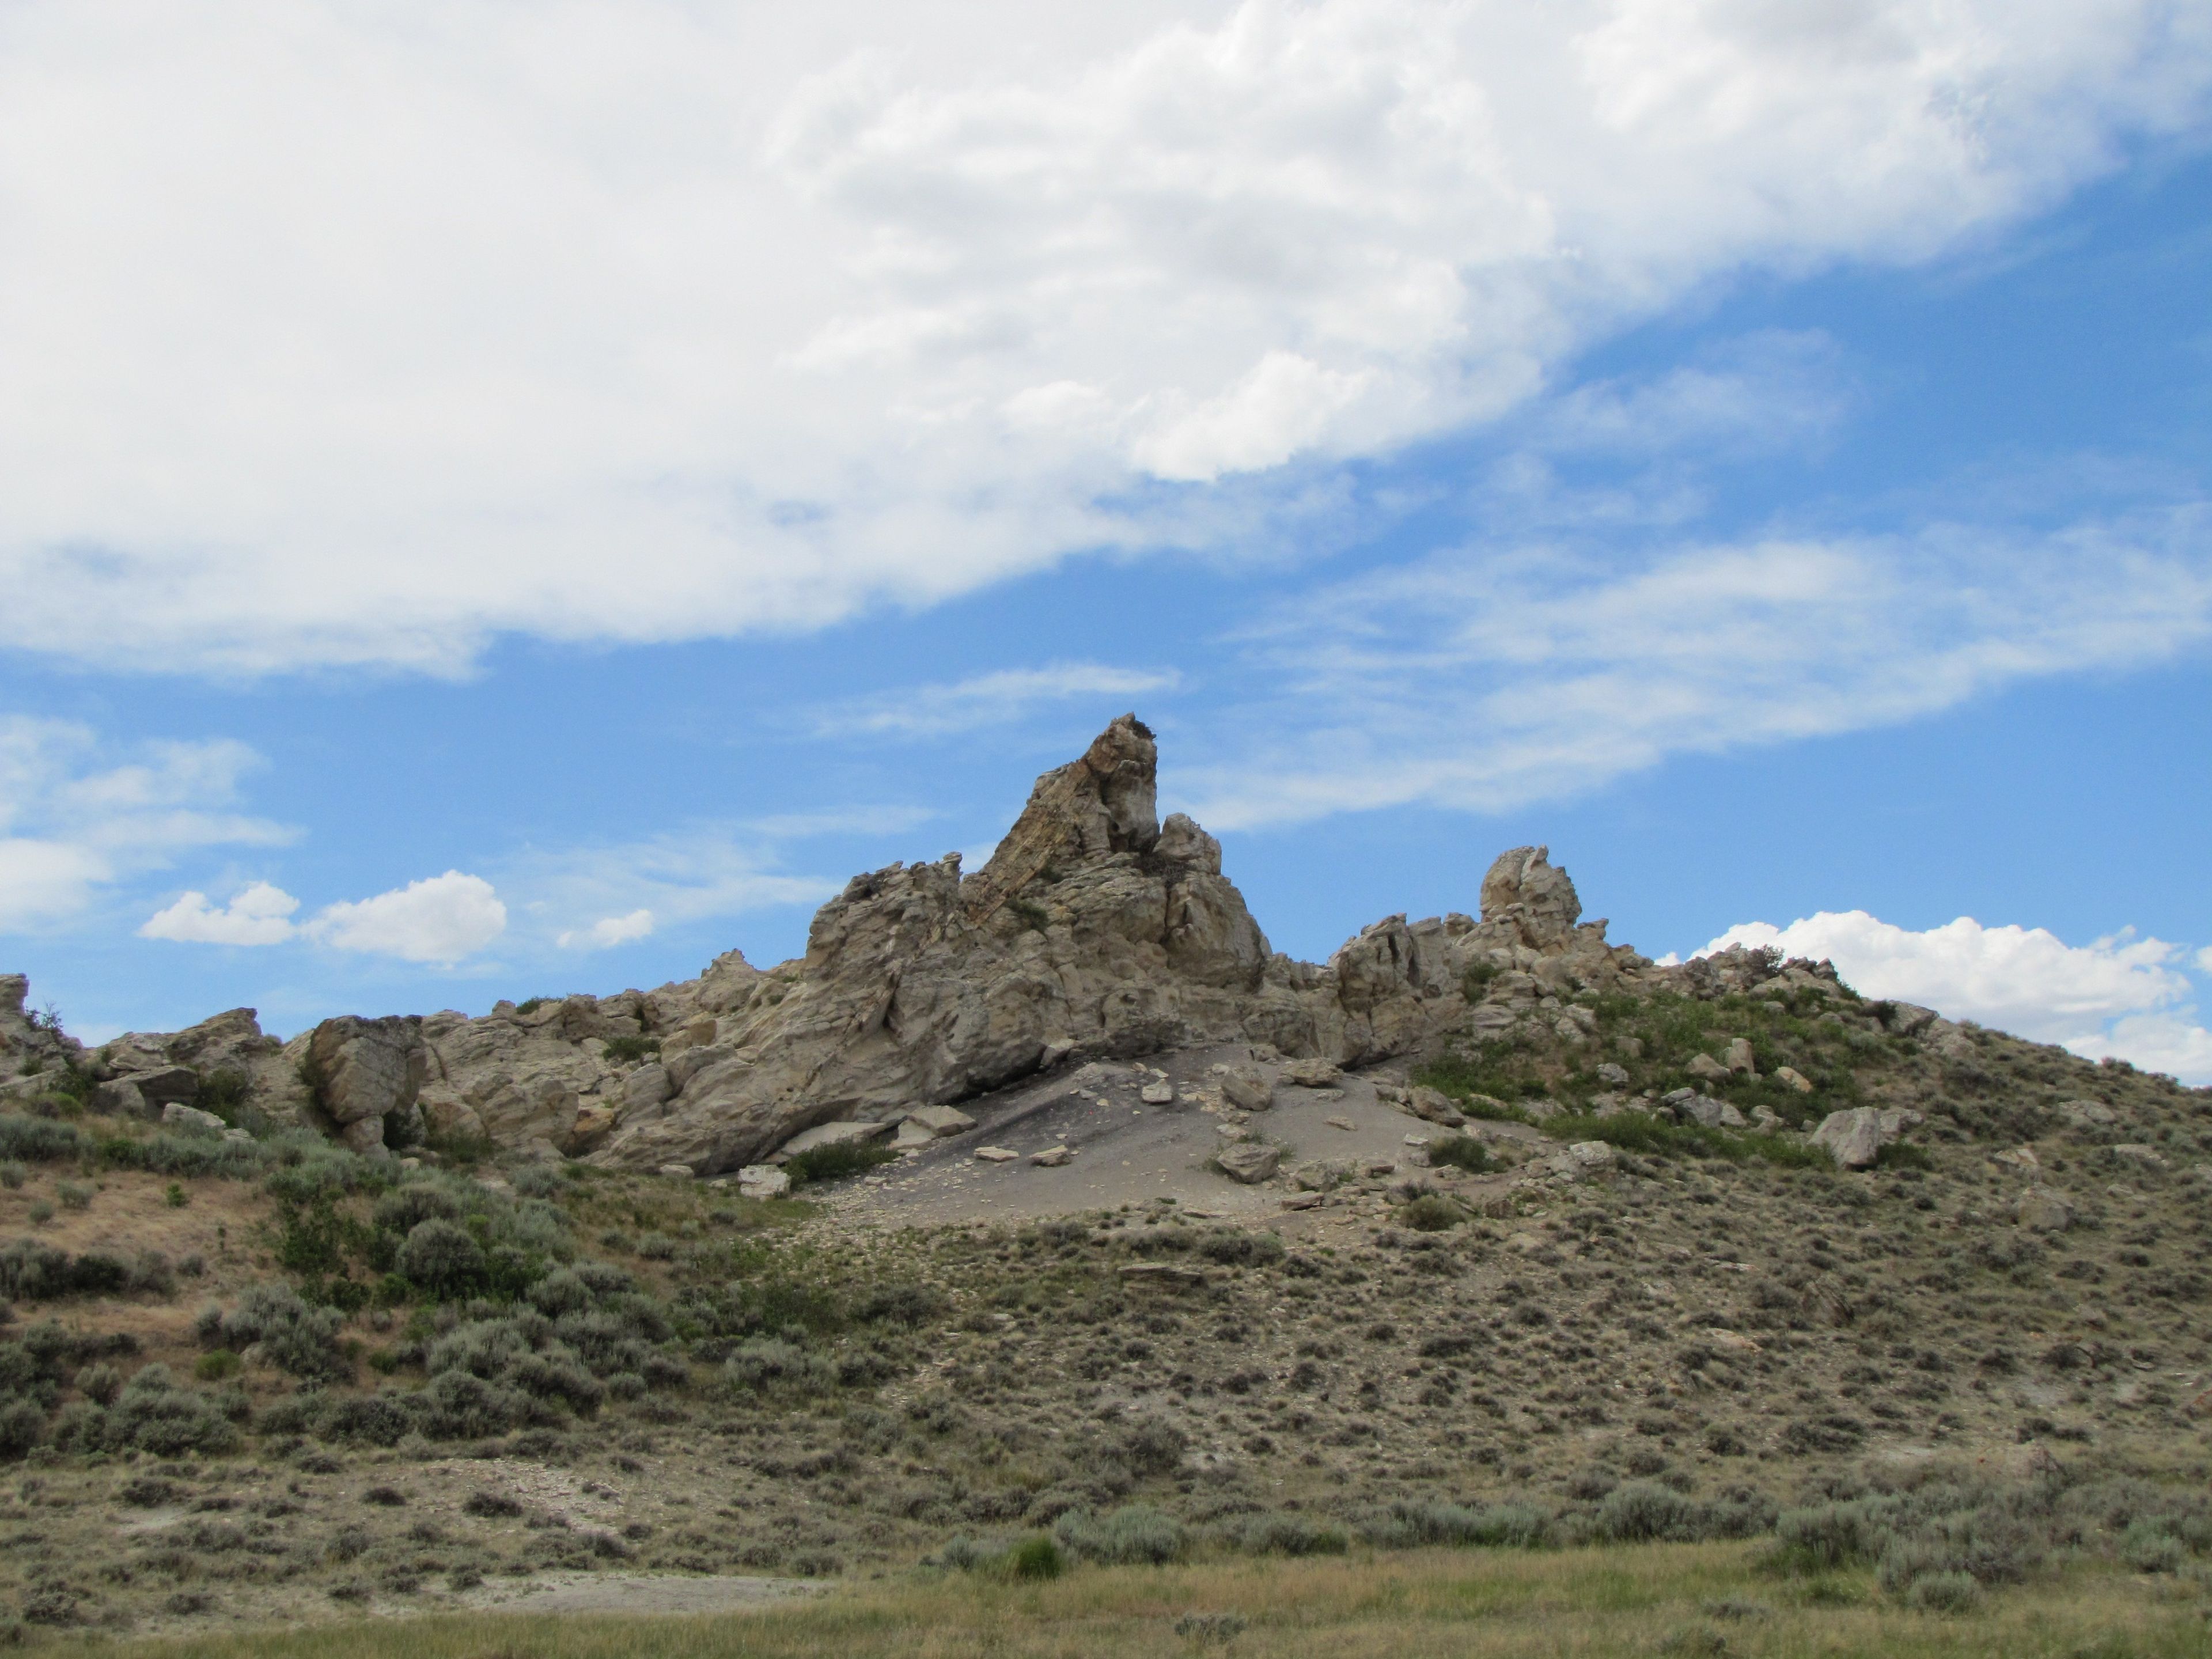 Hills with lots of rocks in Wyoming.